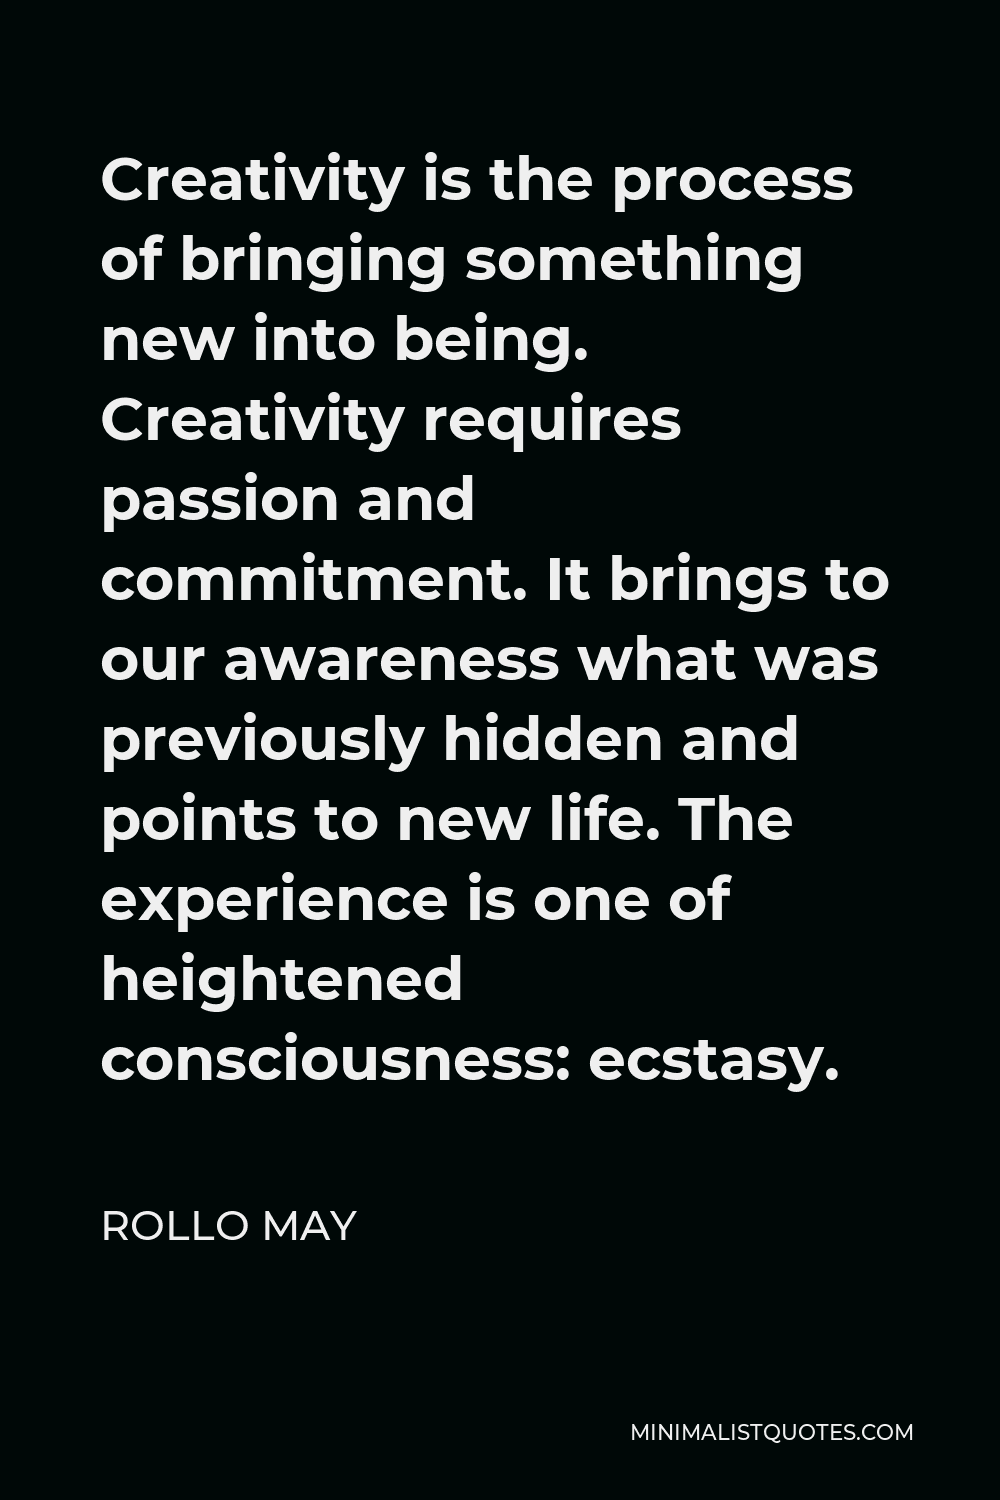 Rollo May Quote - Creativity is the process of bringing something new into being. Creativity requires passion and commitment. It brings to our awareness what was previously hidden and points to new life. The experience is one of heightened consciousness: ecstasy.